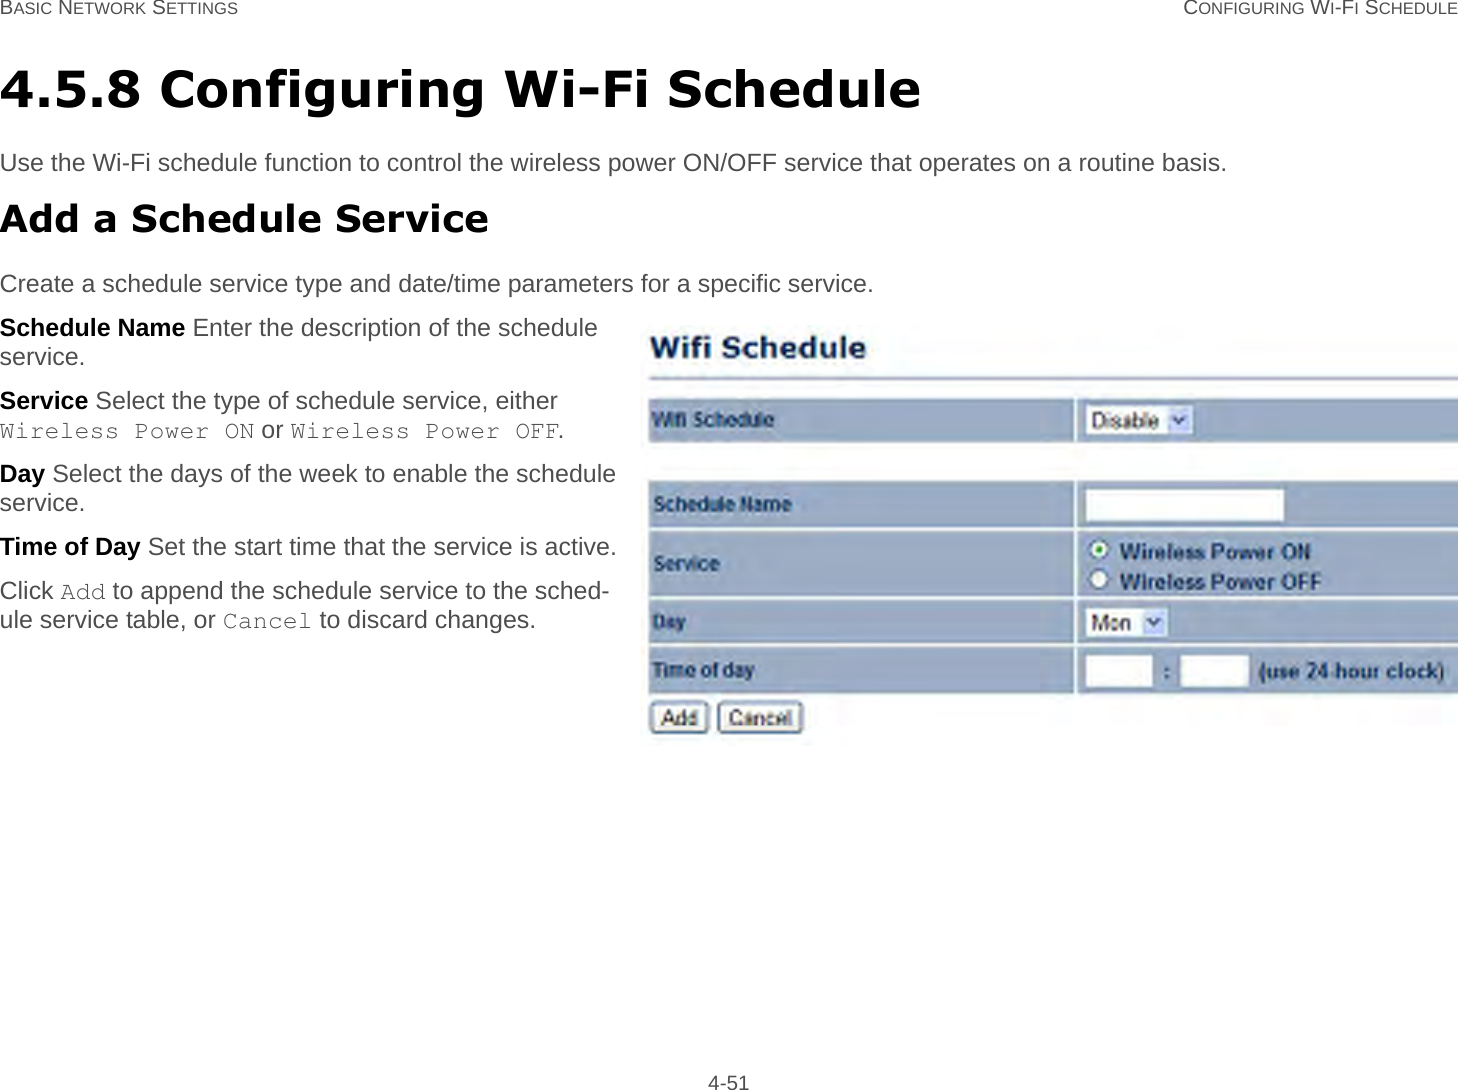 BASIC NETWORK SETTINGS CONFIGURING WI-FI SCHEDULE 4-514.5.8 Configuring Wi-Fi ScheduleUse the Wi-Fi schedule function to control the wireless power ON/OFF service that operates on a routine basis.Add a Schedule ServiceCreate a schedule service type and date/time parameters for a specific service.Schedule Name Enter the description of the schedule service.Service Select the type of schedule service, either Wireless Power ON or Wireless Power OFF.Day Select the days of the week to enable the schedule service.Time of Day Set the start time that the service is active.Click Add to append the schedule service to the sched-ule service table, or Cancel to discard changes.